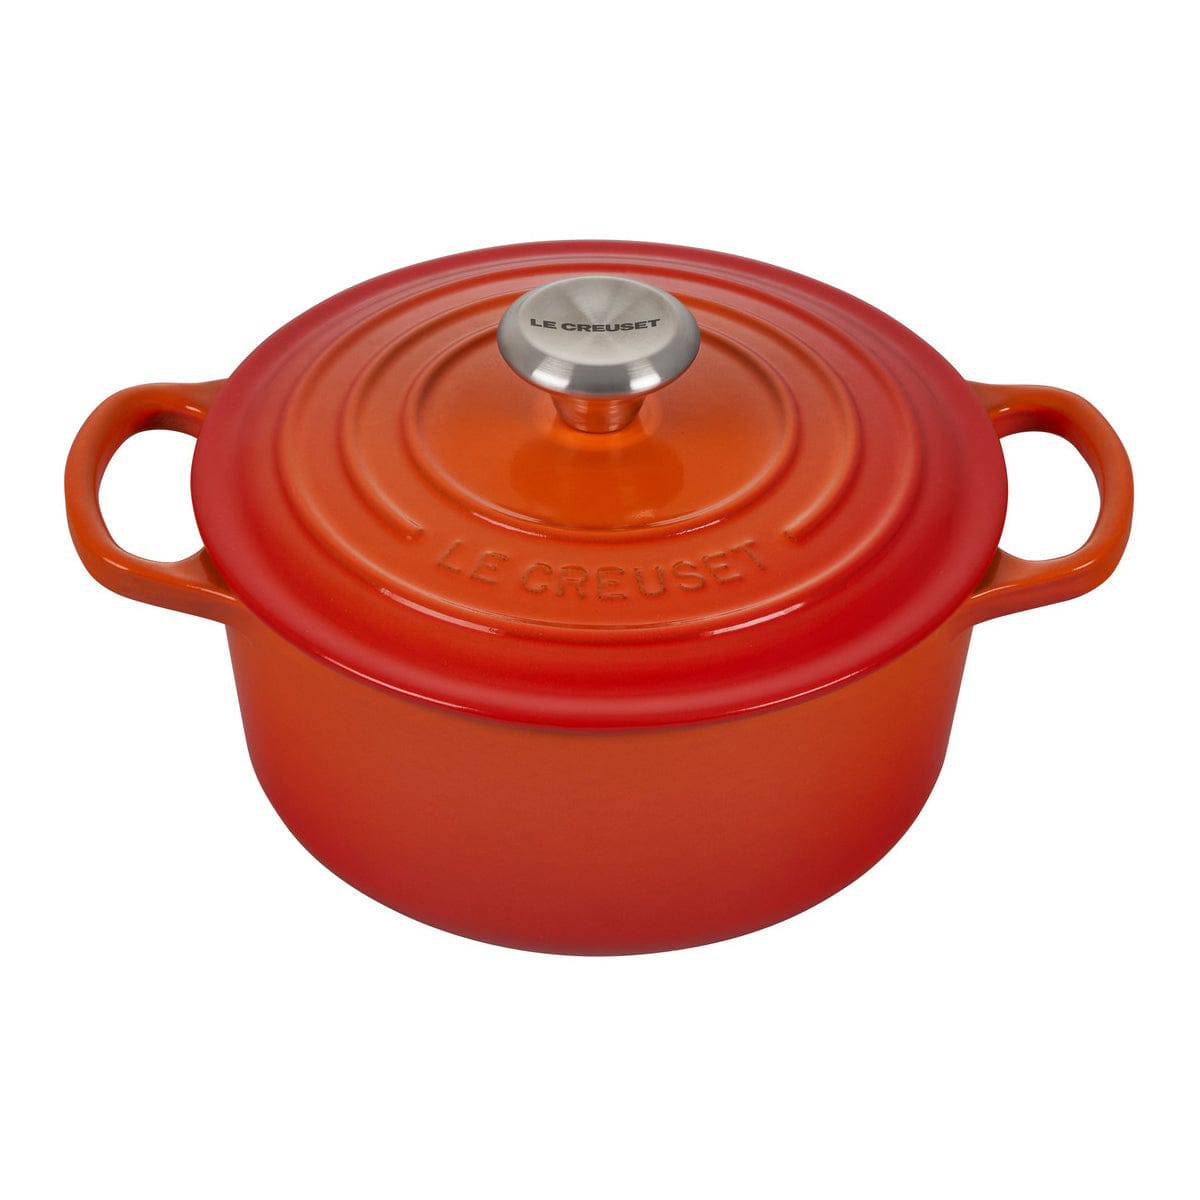 Le Creuset Signature Enameled Cast Iron French / Round Dutch Oven With Lid,  2-Quart, Flame